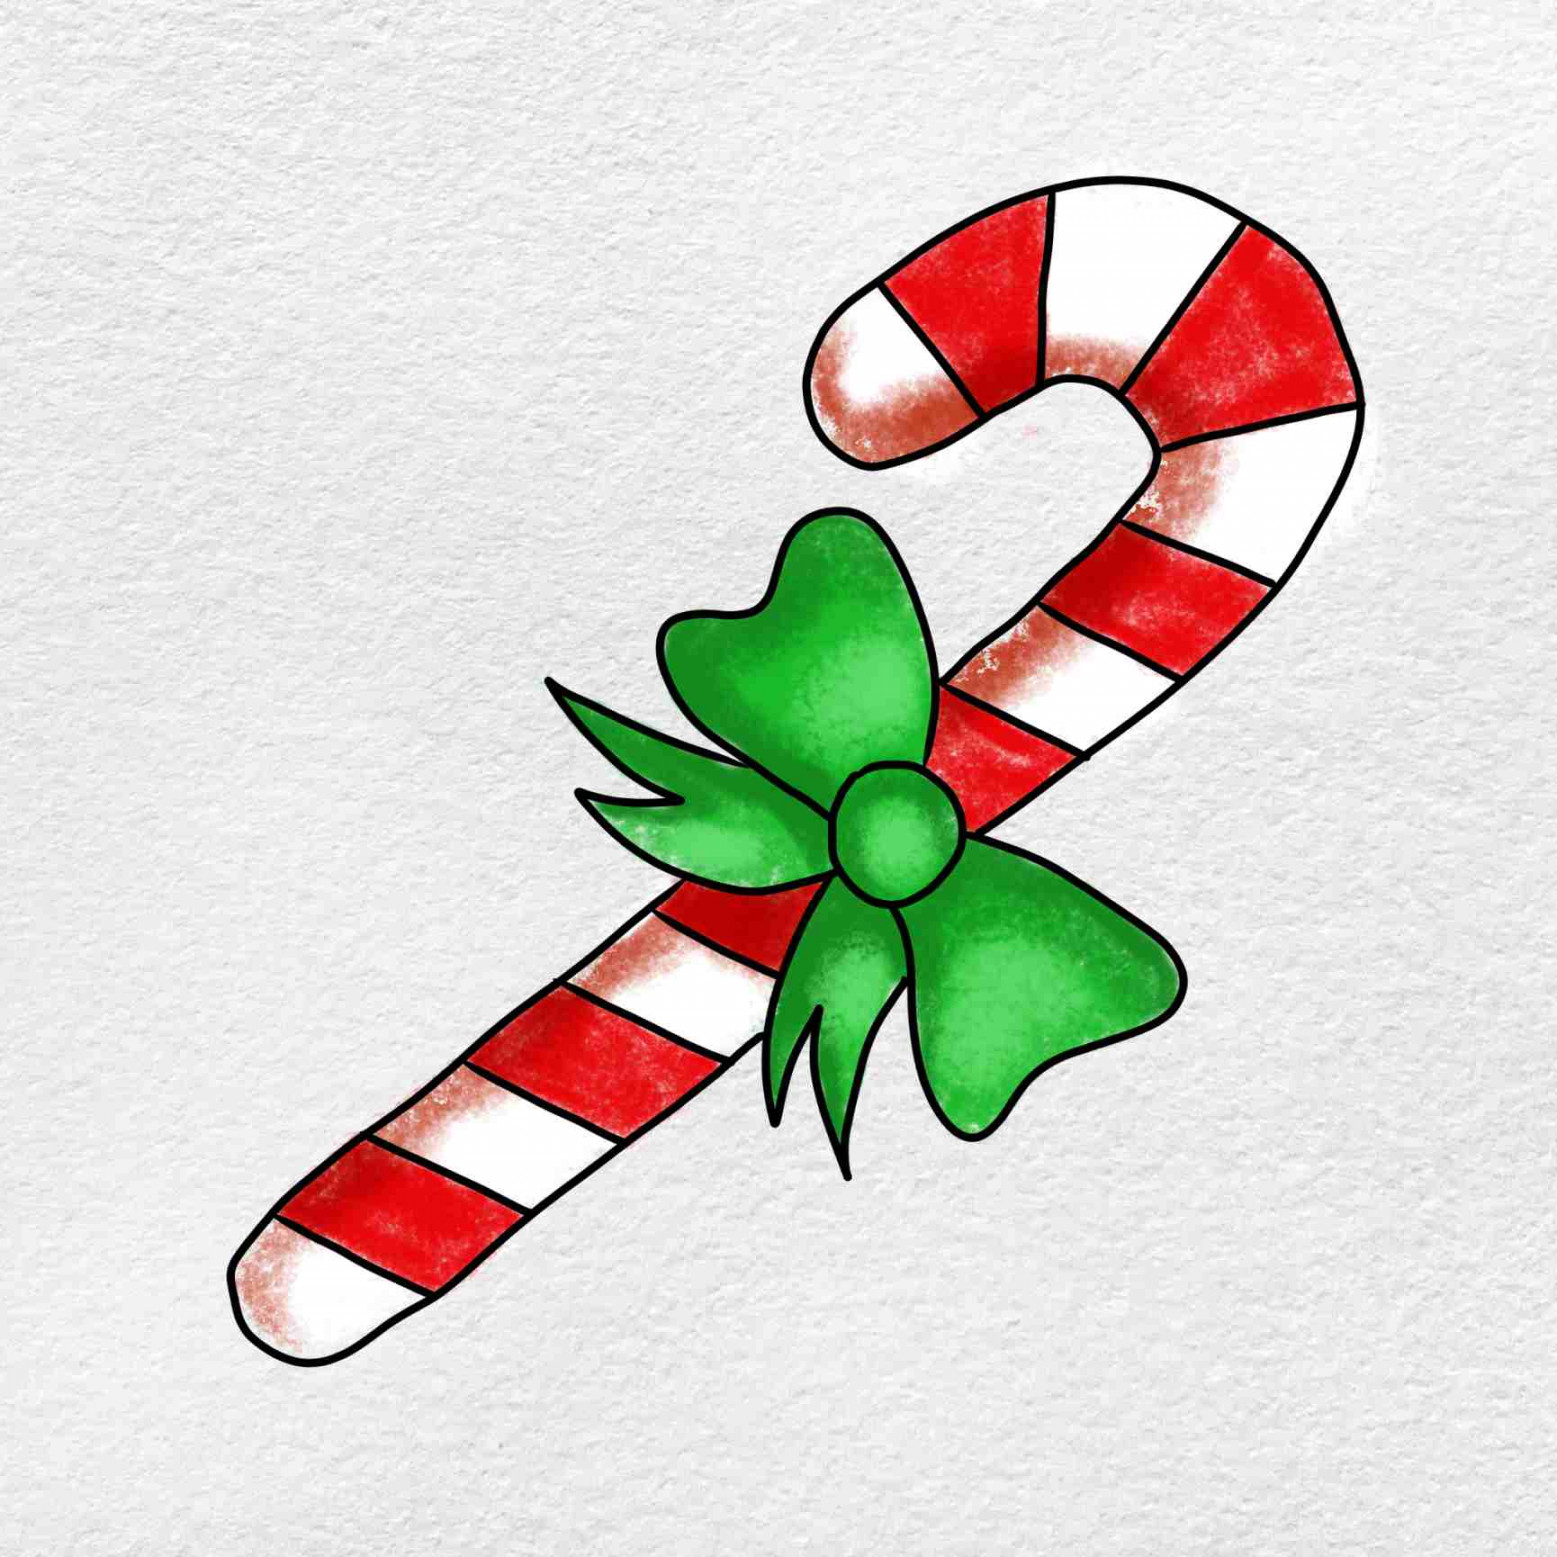 Candy Cane Drawing - HelloArtsy